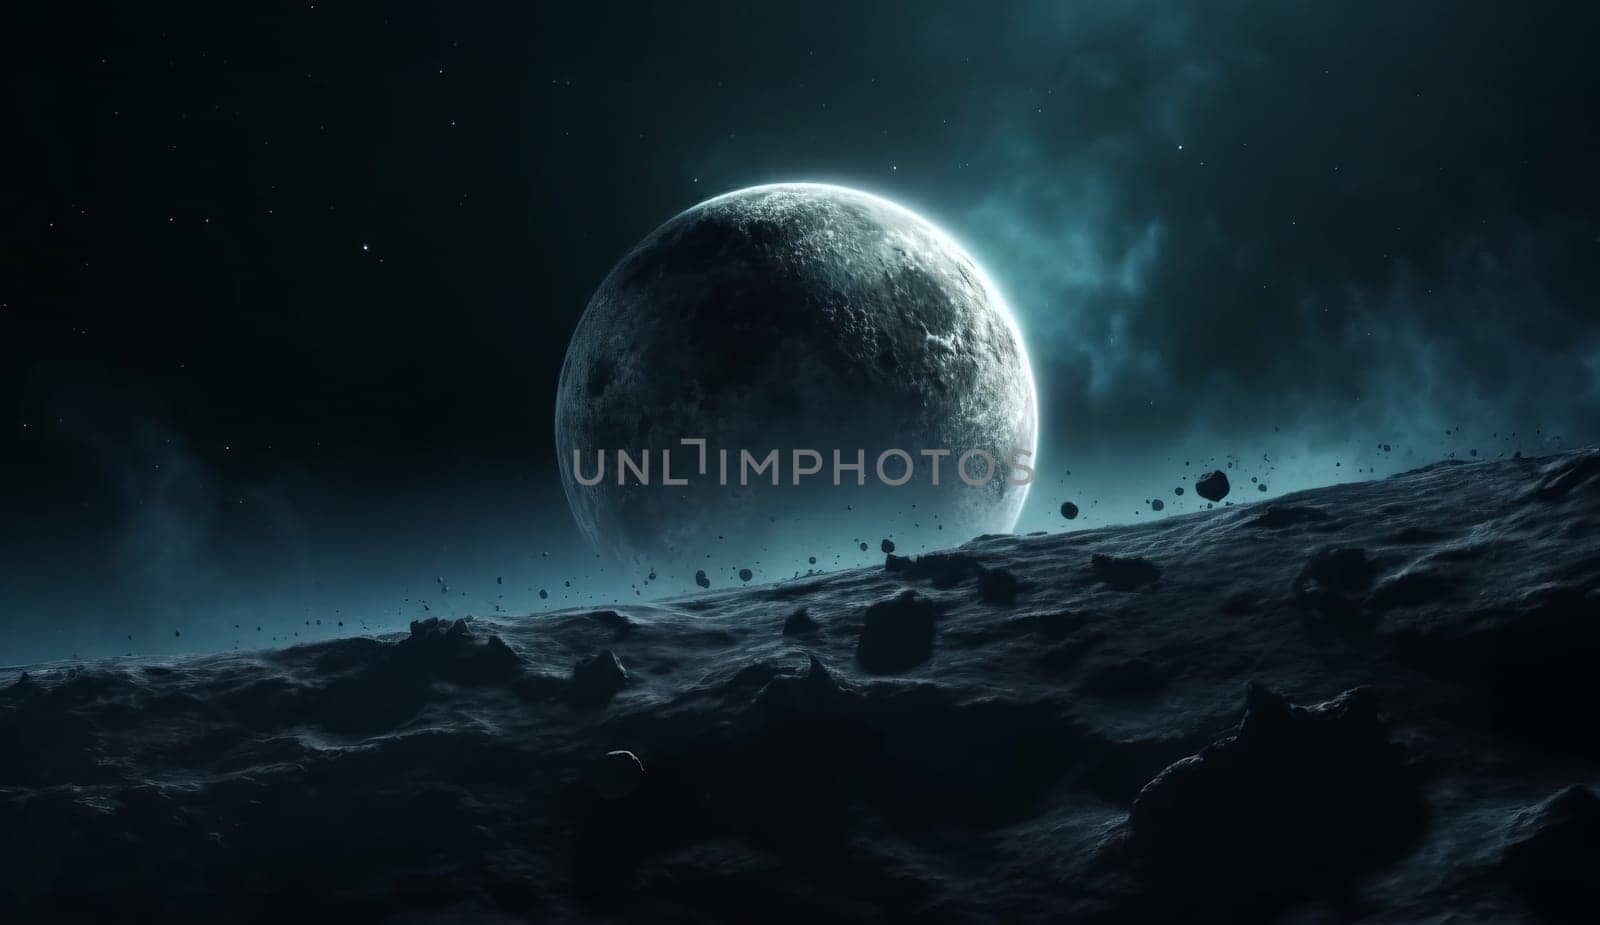 Moon in space in the background of the planet by studiodav